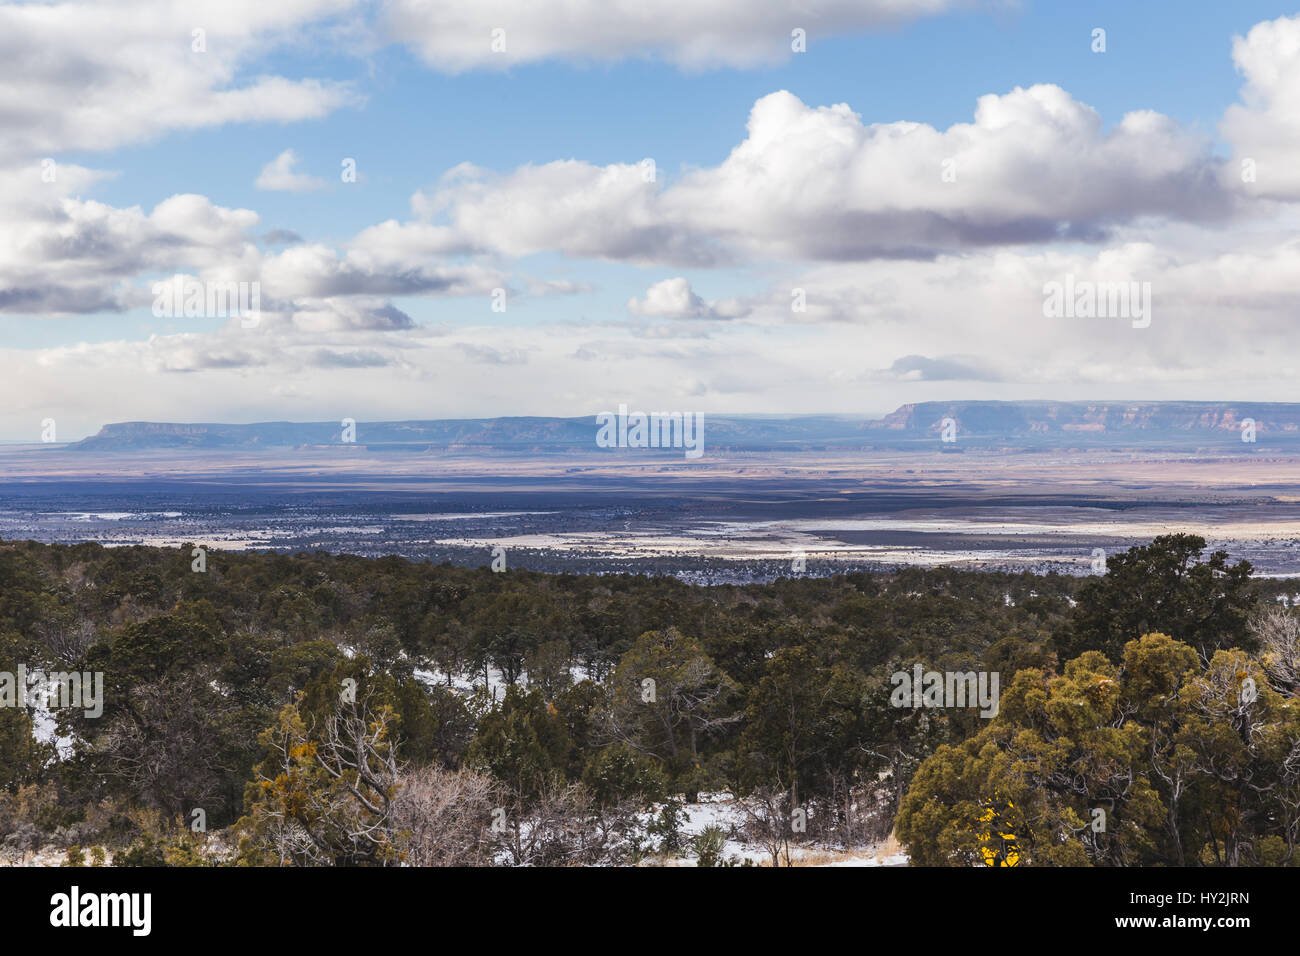 Desert landscape with clouds over mesas. Winter day with snow on ground. Stock Photo